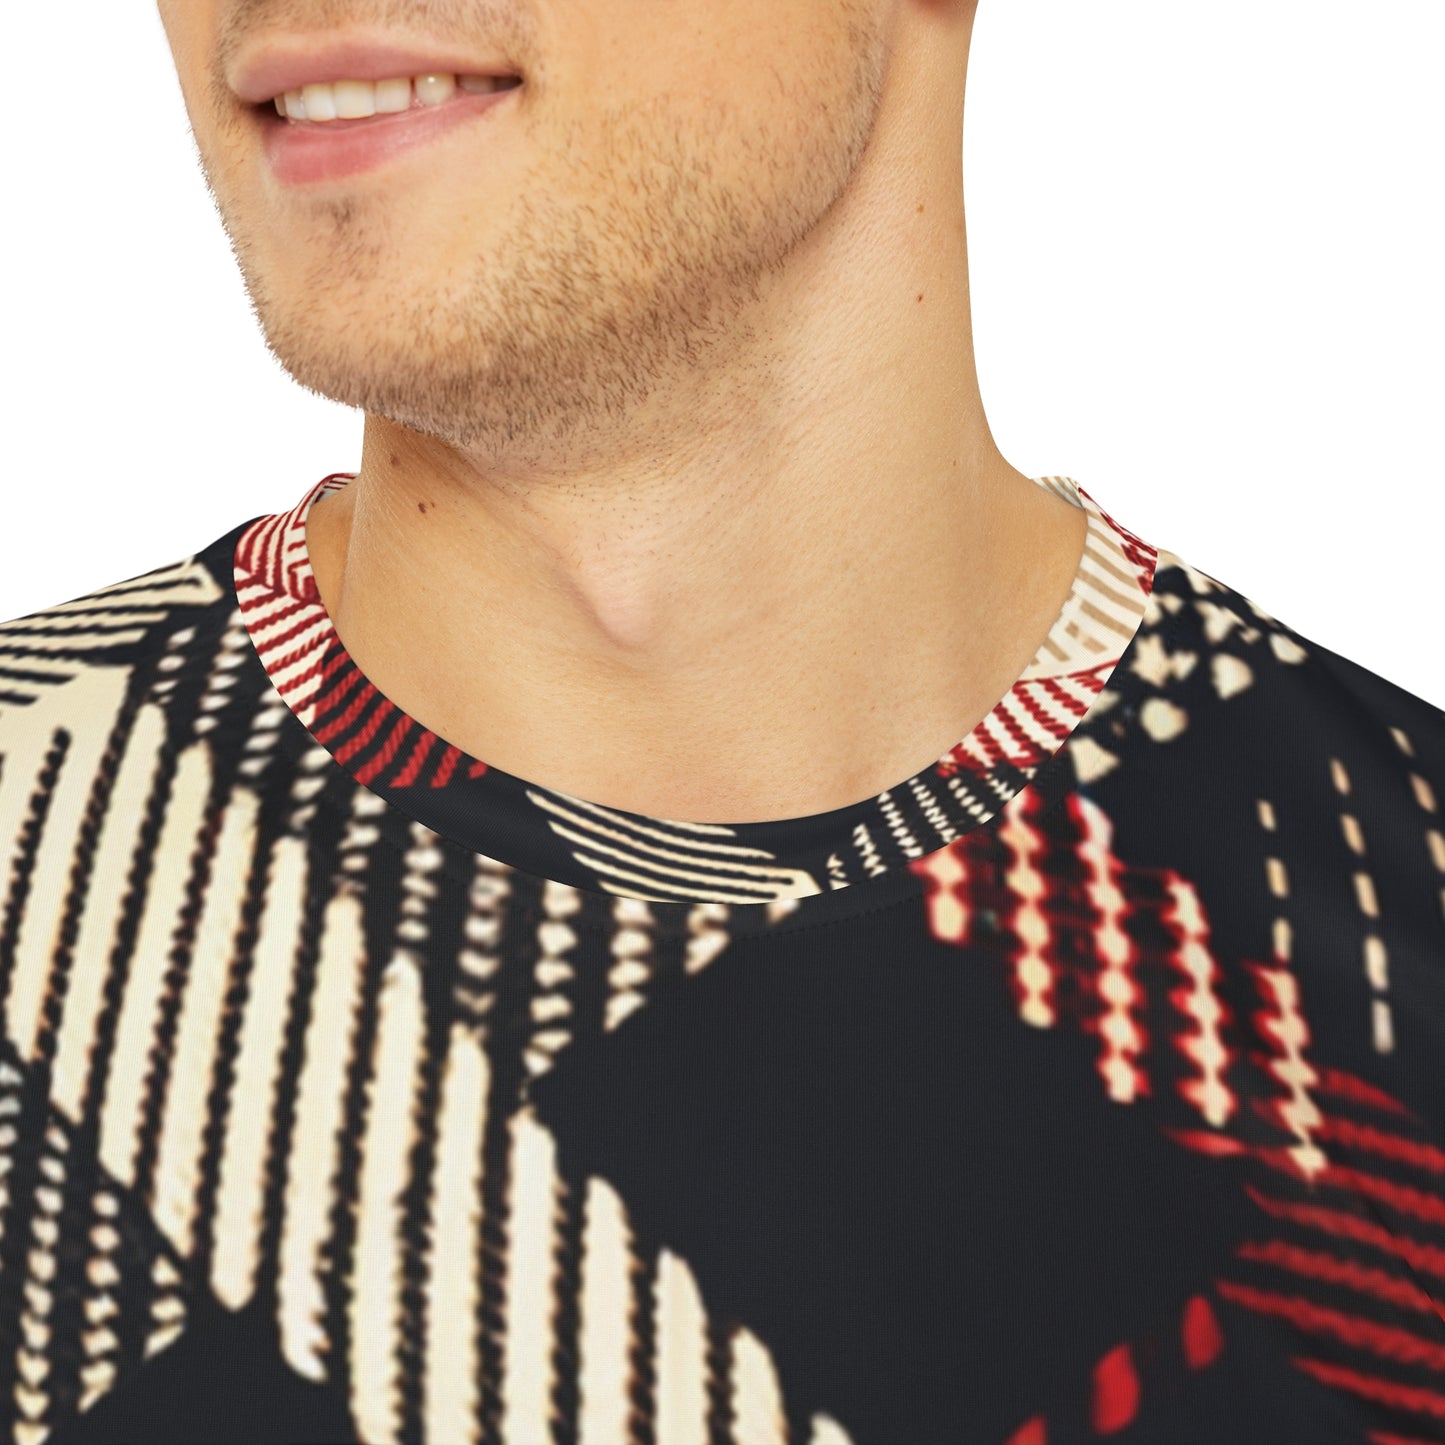 Close-up shot of the Crimson Houndstooth Cascade Crewneck Pullover All-Over Print Short-Sleeved Shirt worn by a white man